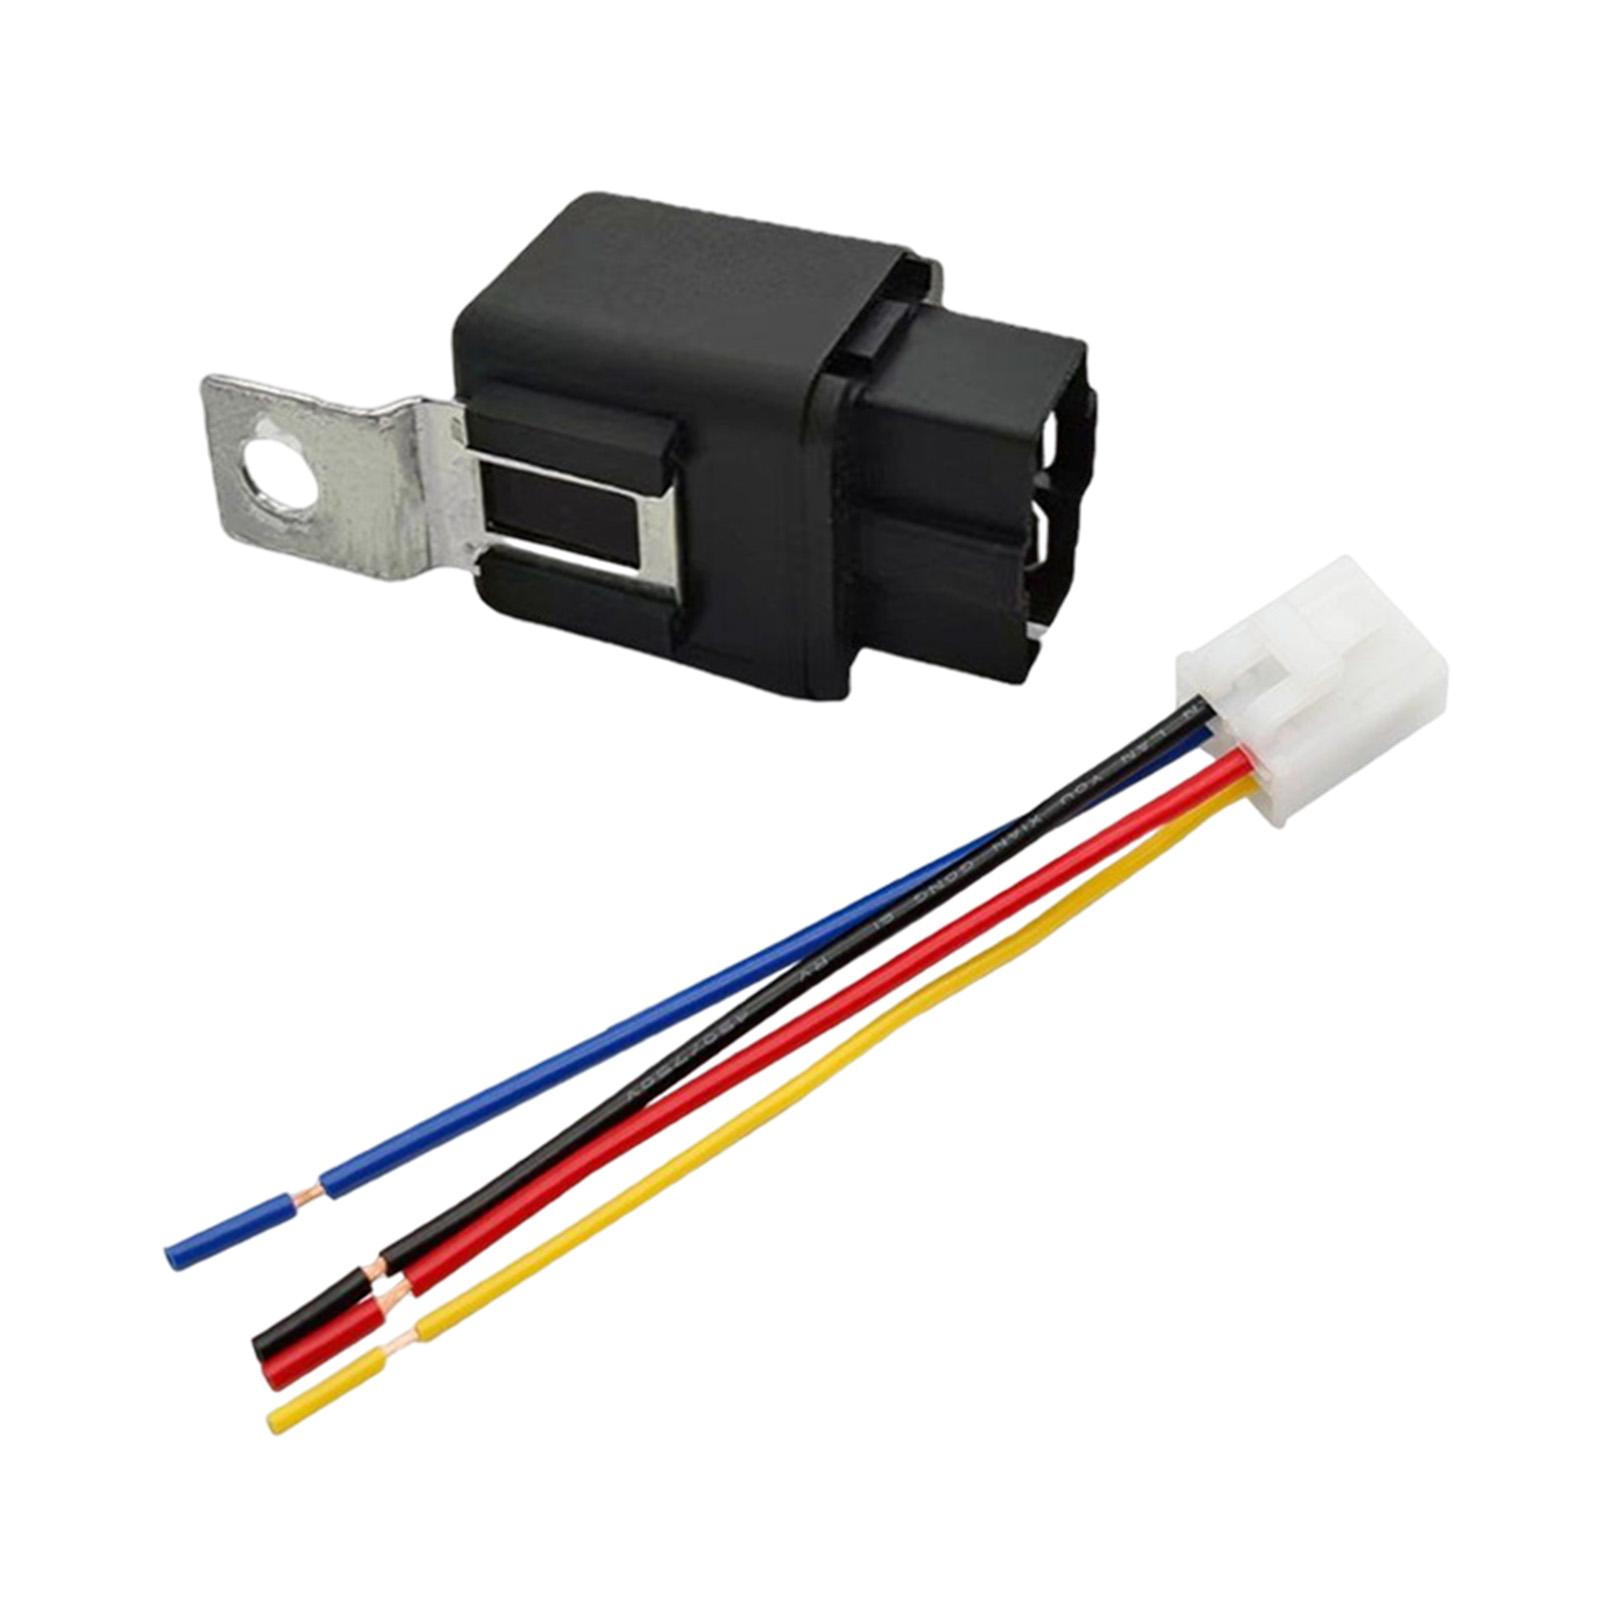 Automotive Relay Accessories Replacement for Air Conditioning Vehicles 12V with socket